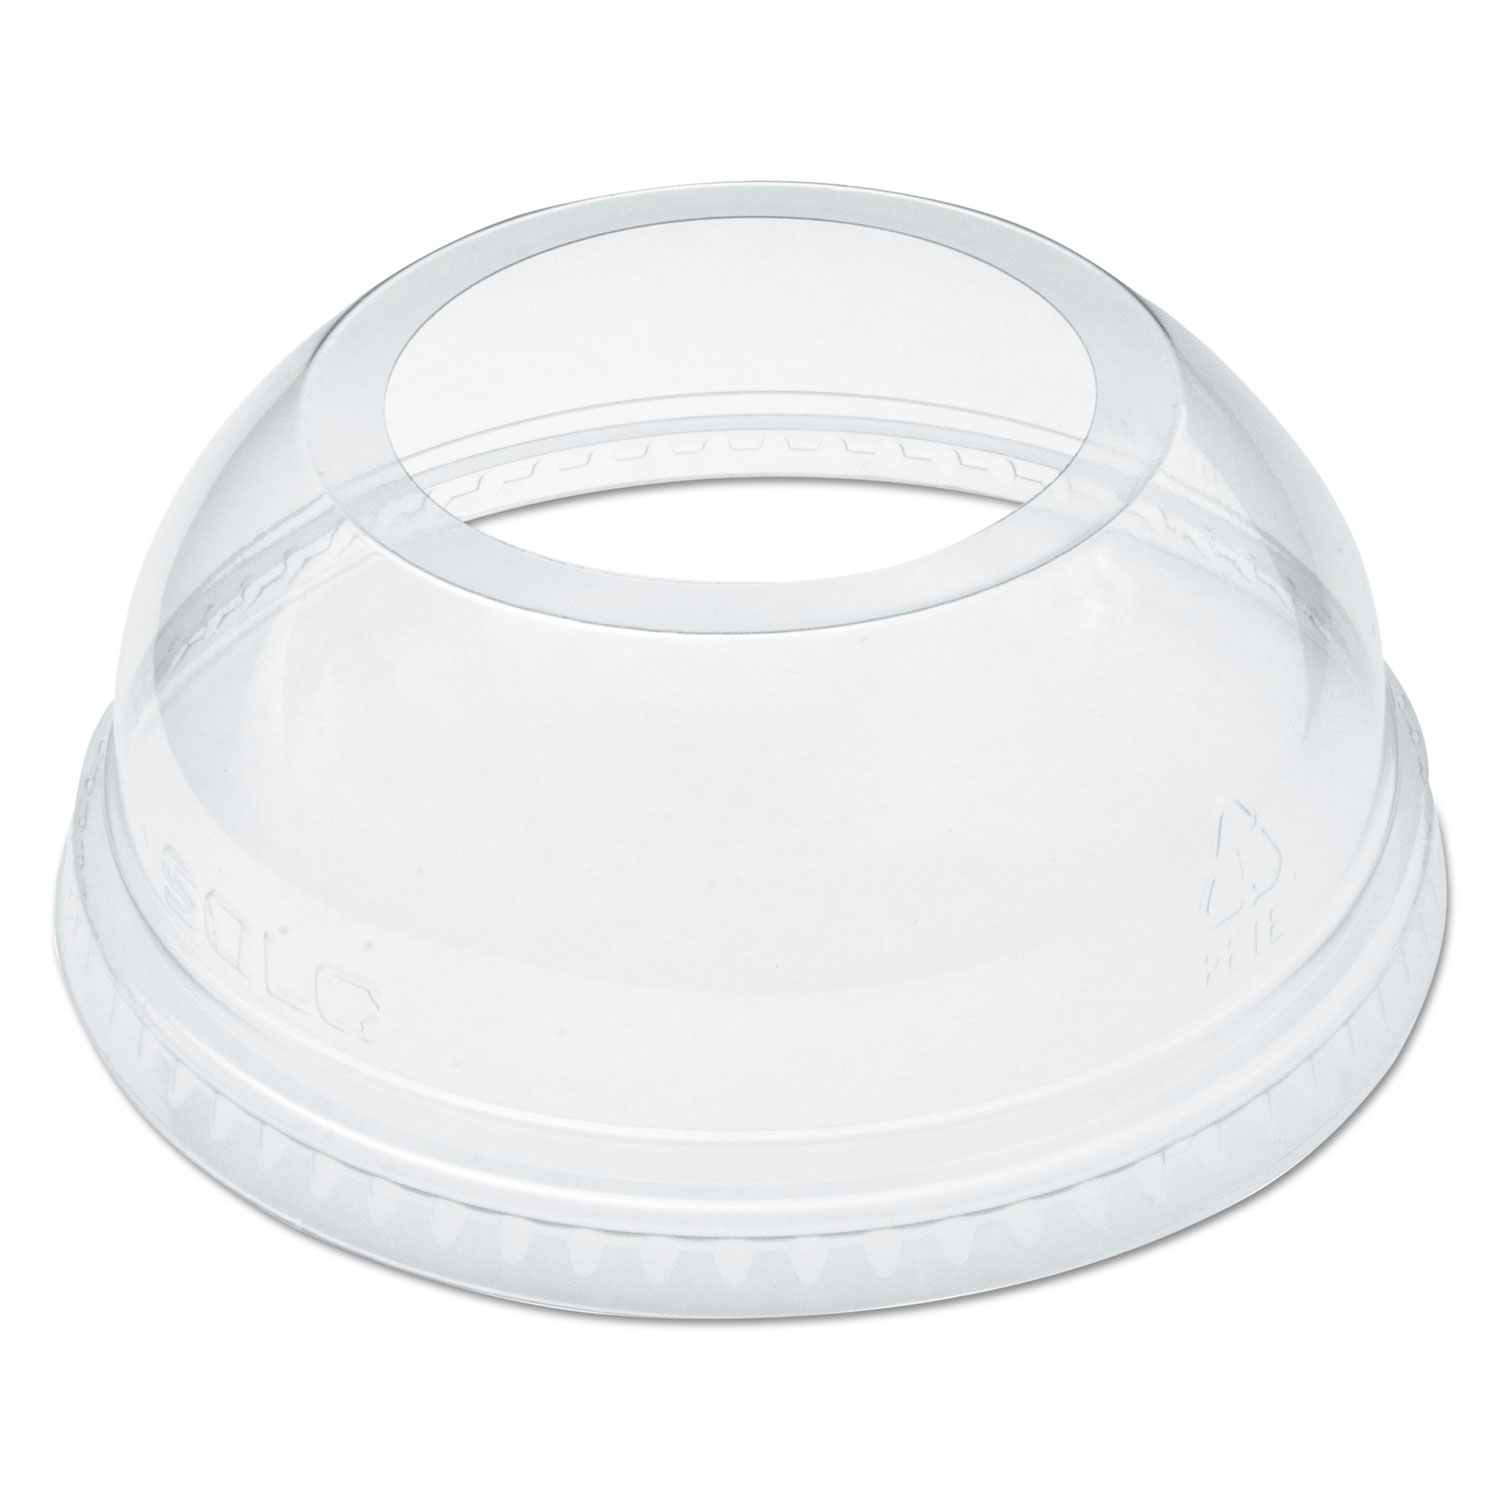  Dart DLW626 Open-Top Dome Lid for 16-24 oz Plastic Cups, Clear, 1.9Dia Hole, 1000/Carton (DCCDLW626) 